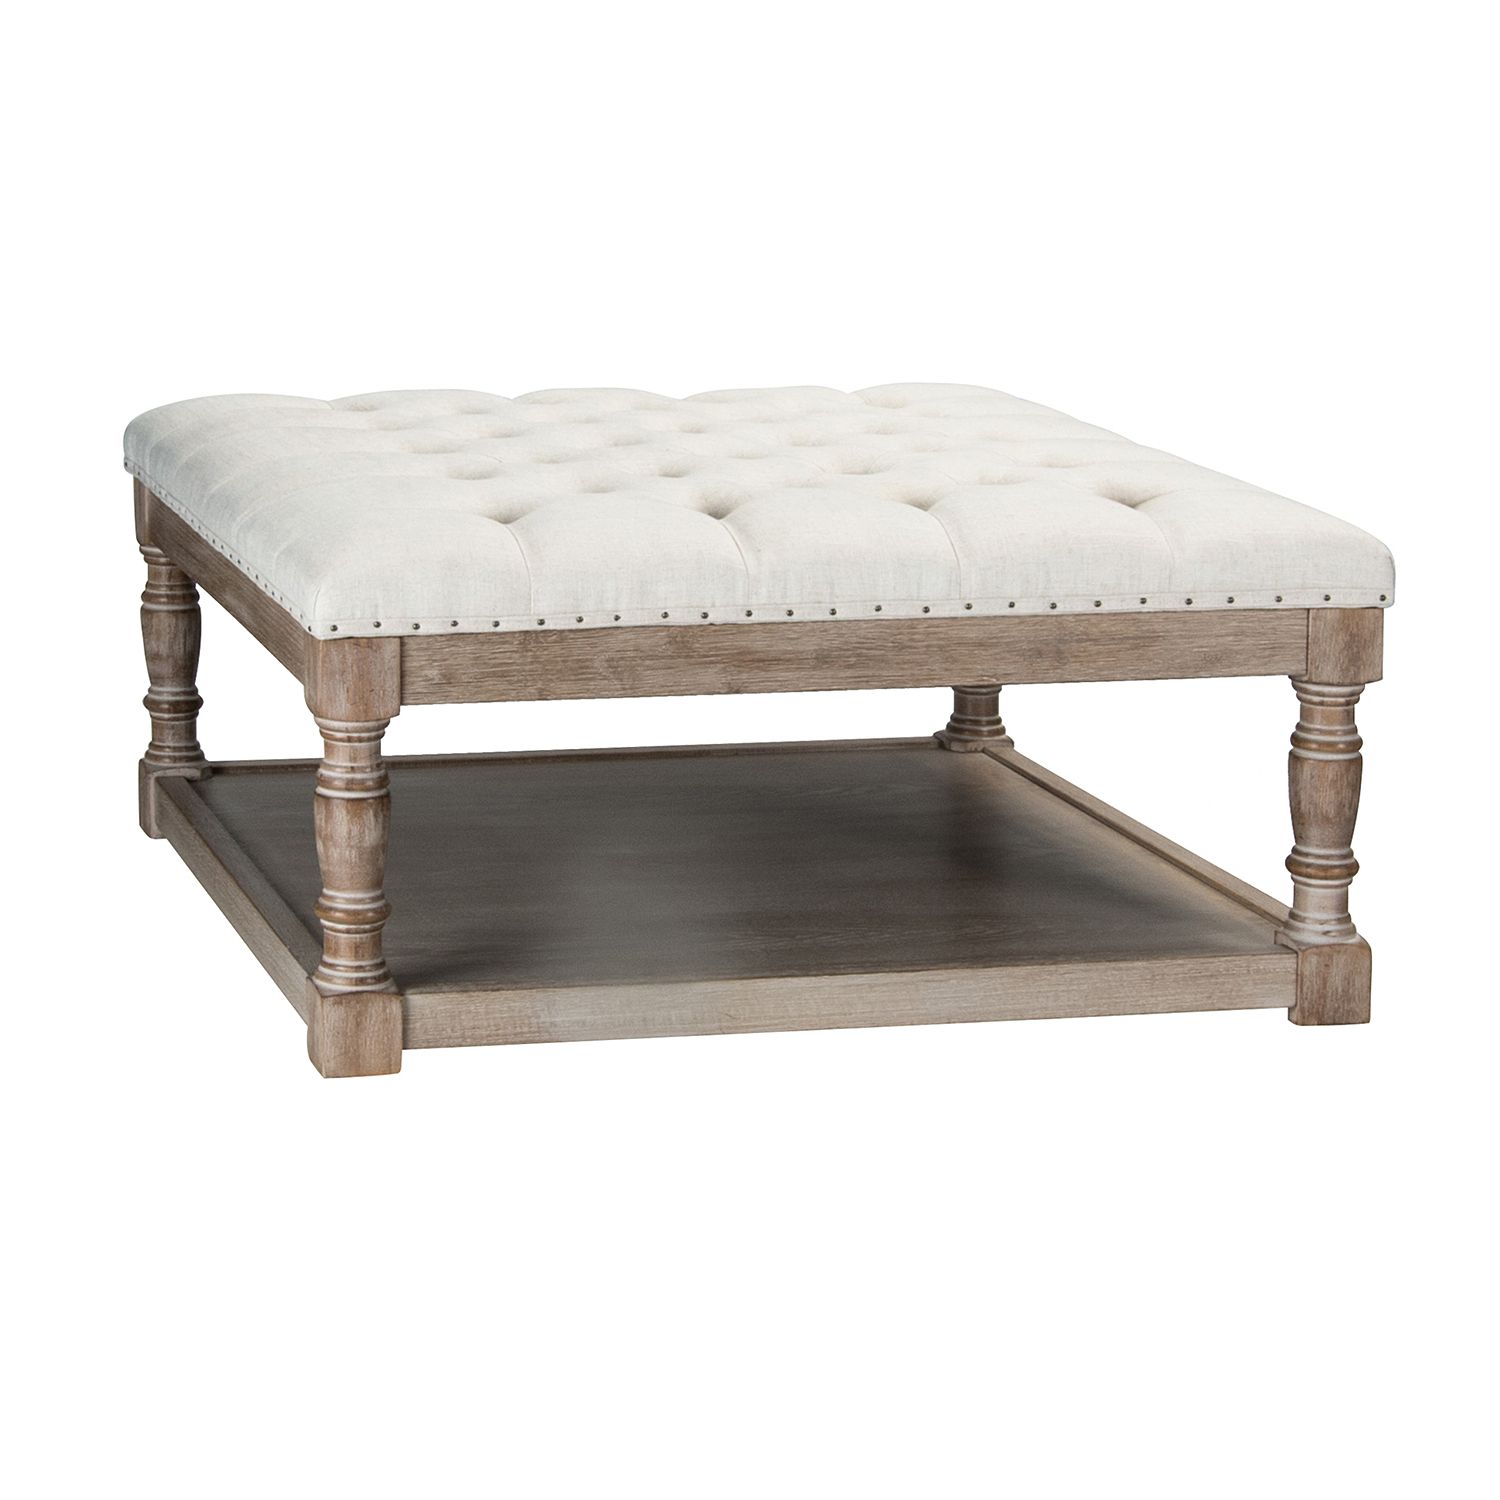 Well Known 14 Karat Home Tufted Cocktail Ottoman Wooden With Storage Shelf, Square  Upholstered Ottoman Coffee Table, Linen – Walmart With Regard To Beige Thomas Ottomans (View 9 of 15)